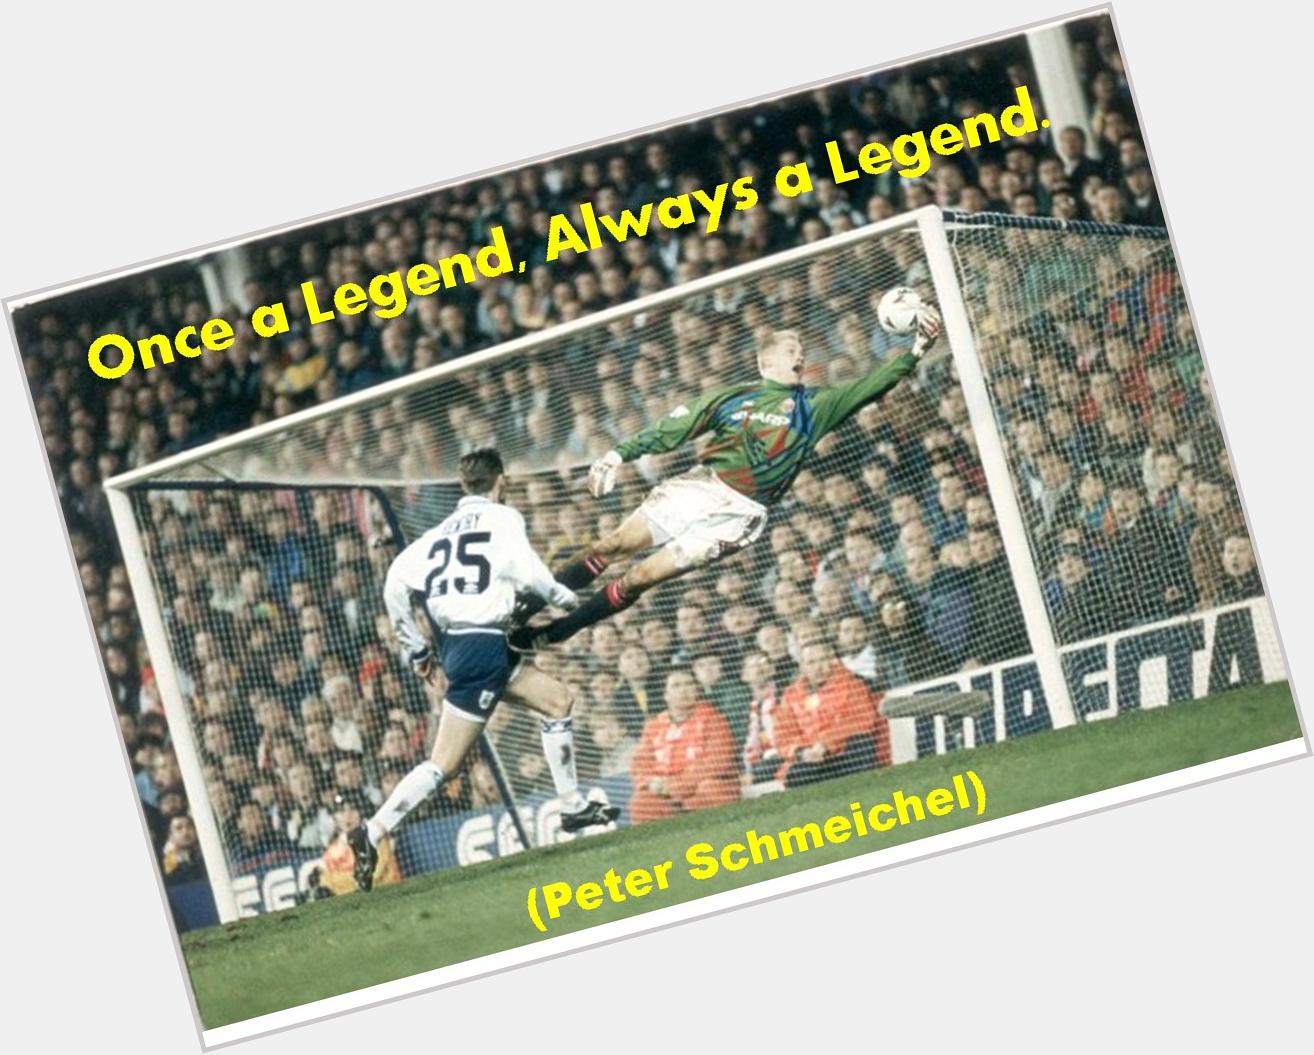 HAPPY BIRTHDAY to one of the greatest goalkeepers of all-time, Peter Schmeichel. 